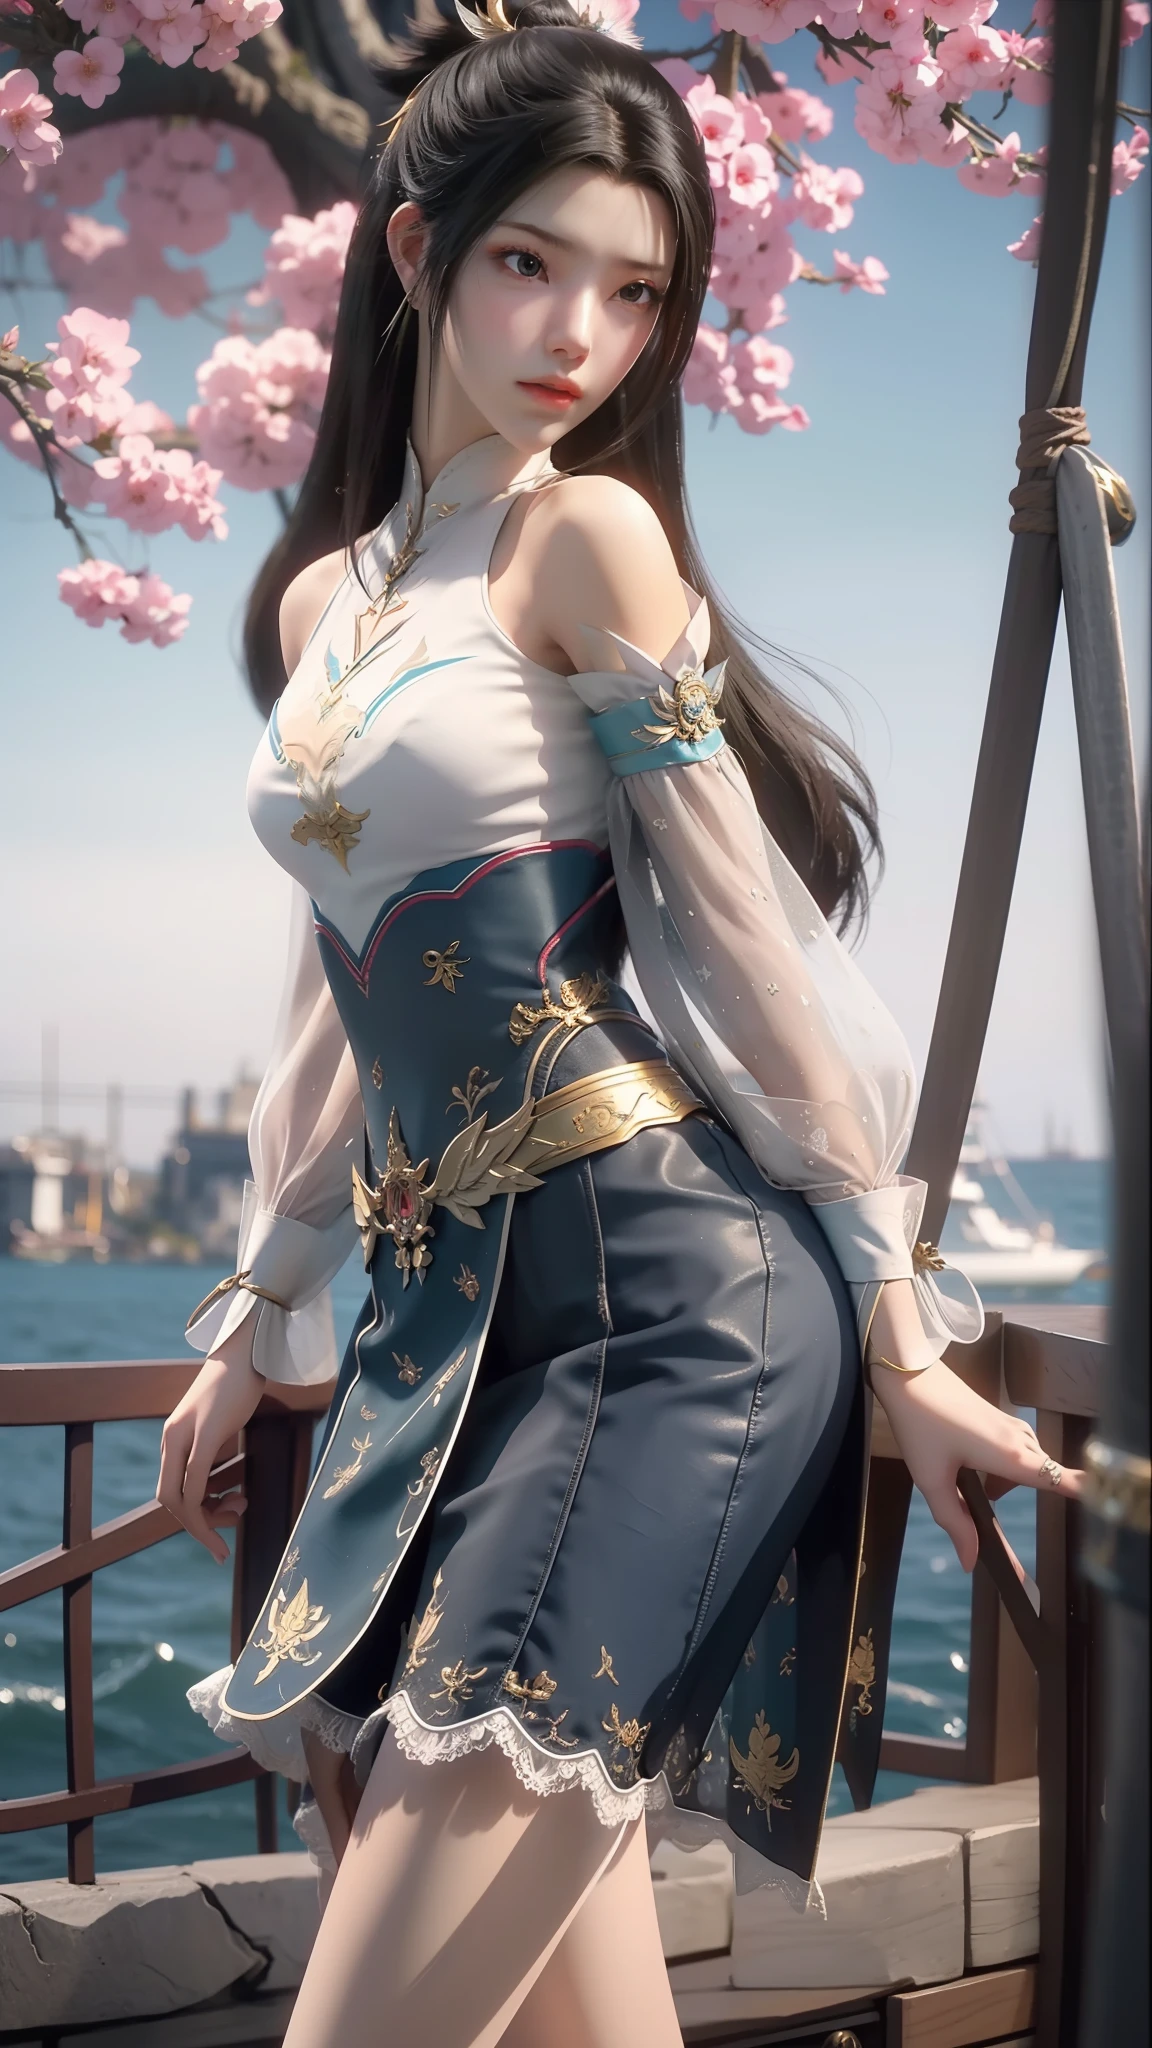 Close-up of a woman in a short skirt standing on a boat, Extremely detailed Artgerm, Range Murata and Artgerm, Style Artgerm, art-style, trending artgerm, beautiful and seductive anime woman, IG model | Art germ, Artistic germ style, 《overwatch》Anna, like artgerm